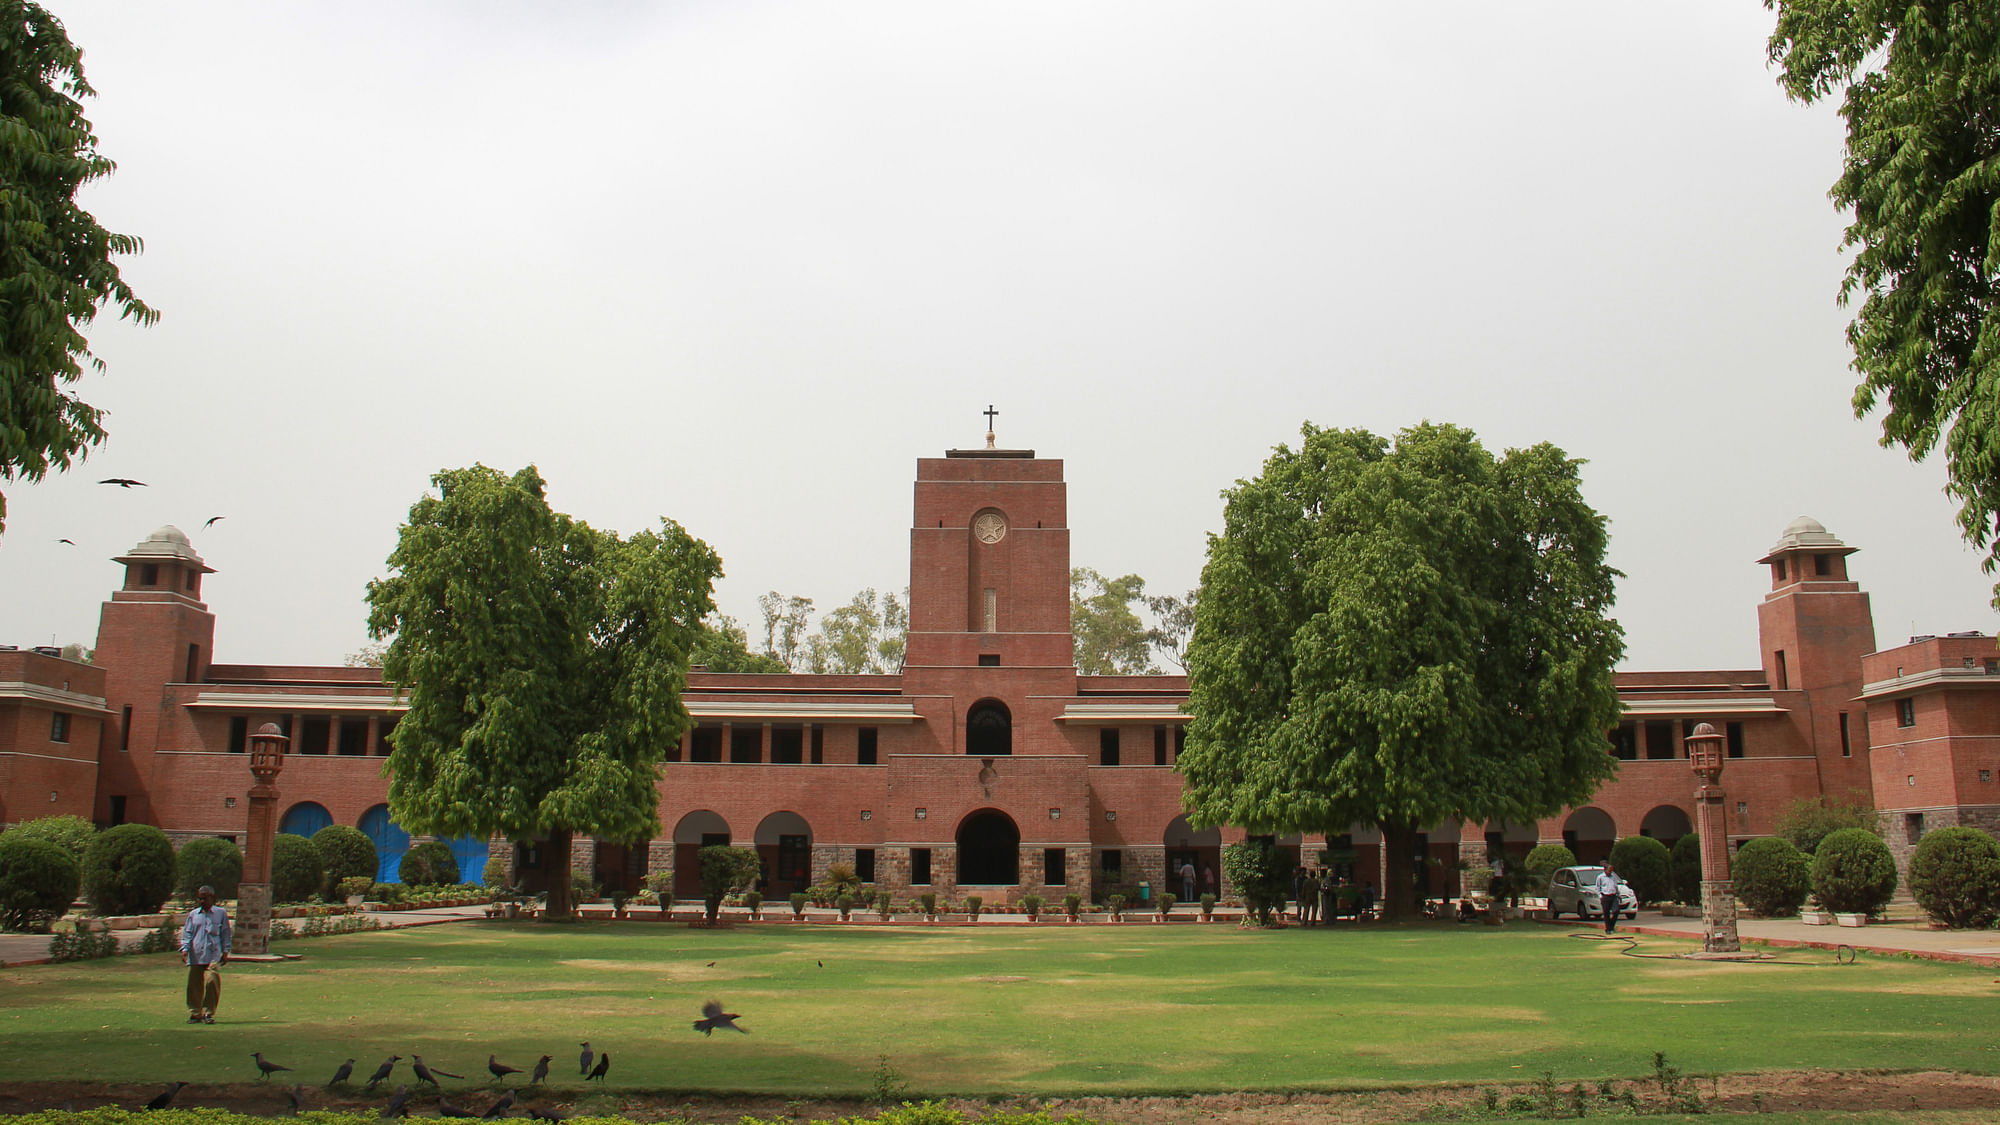 Students must first register with the University of Delhi to apply to St Stephens College.